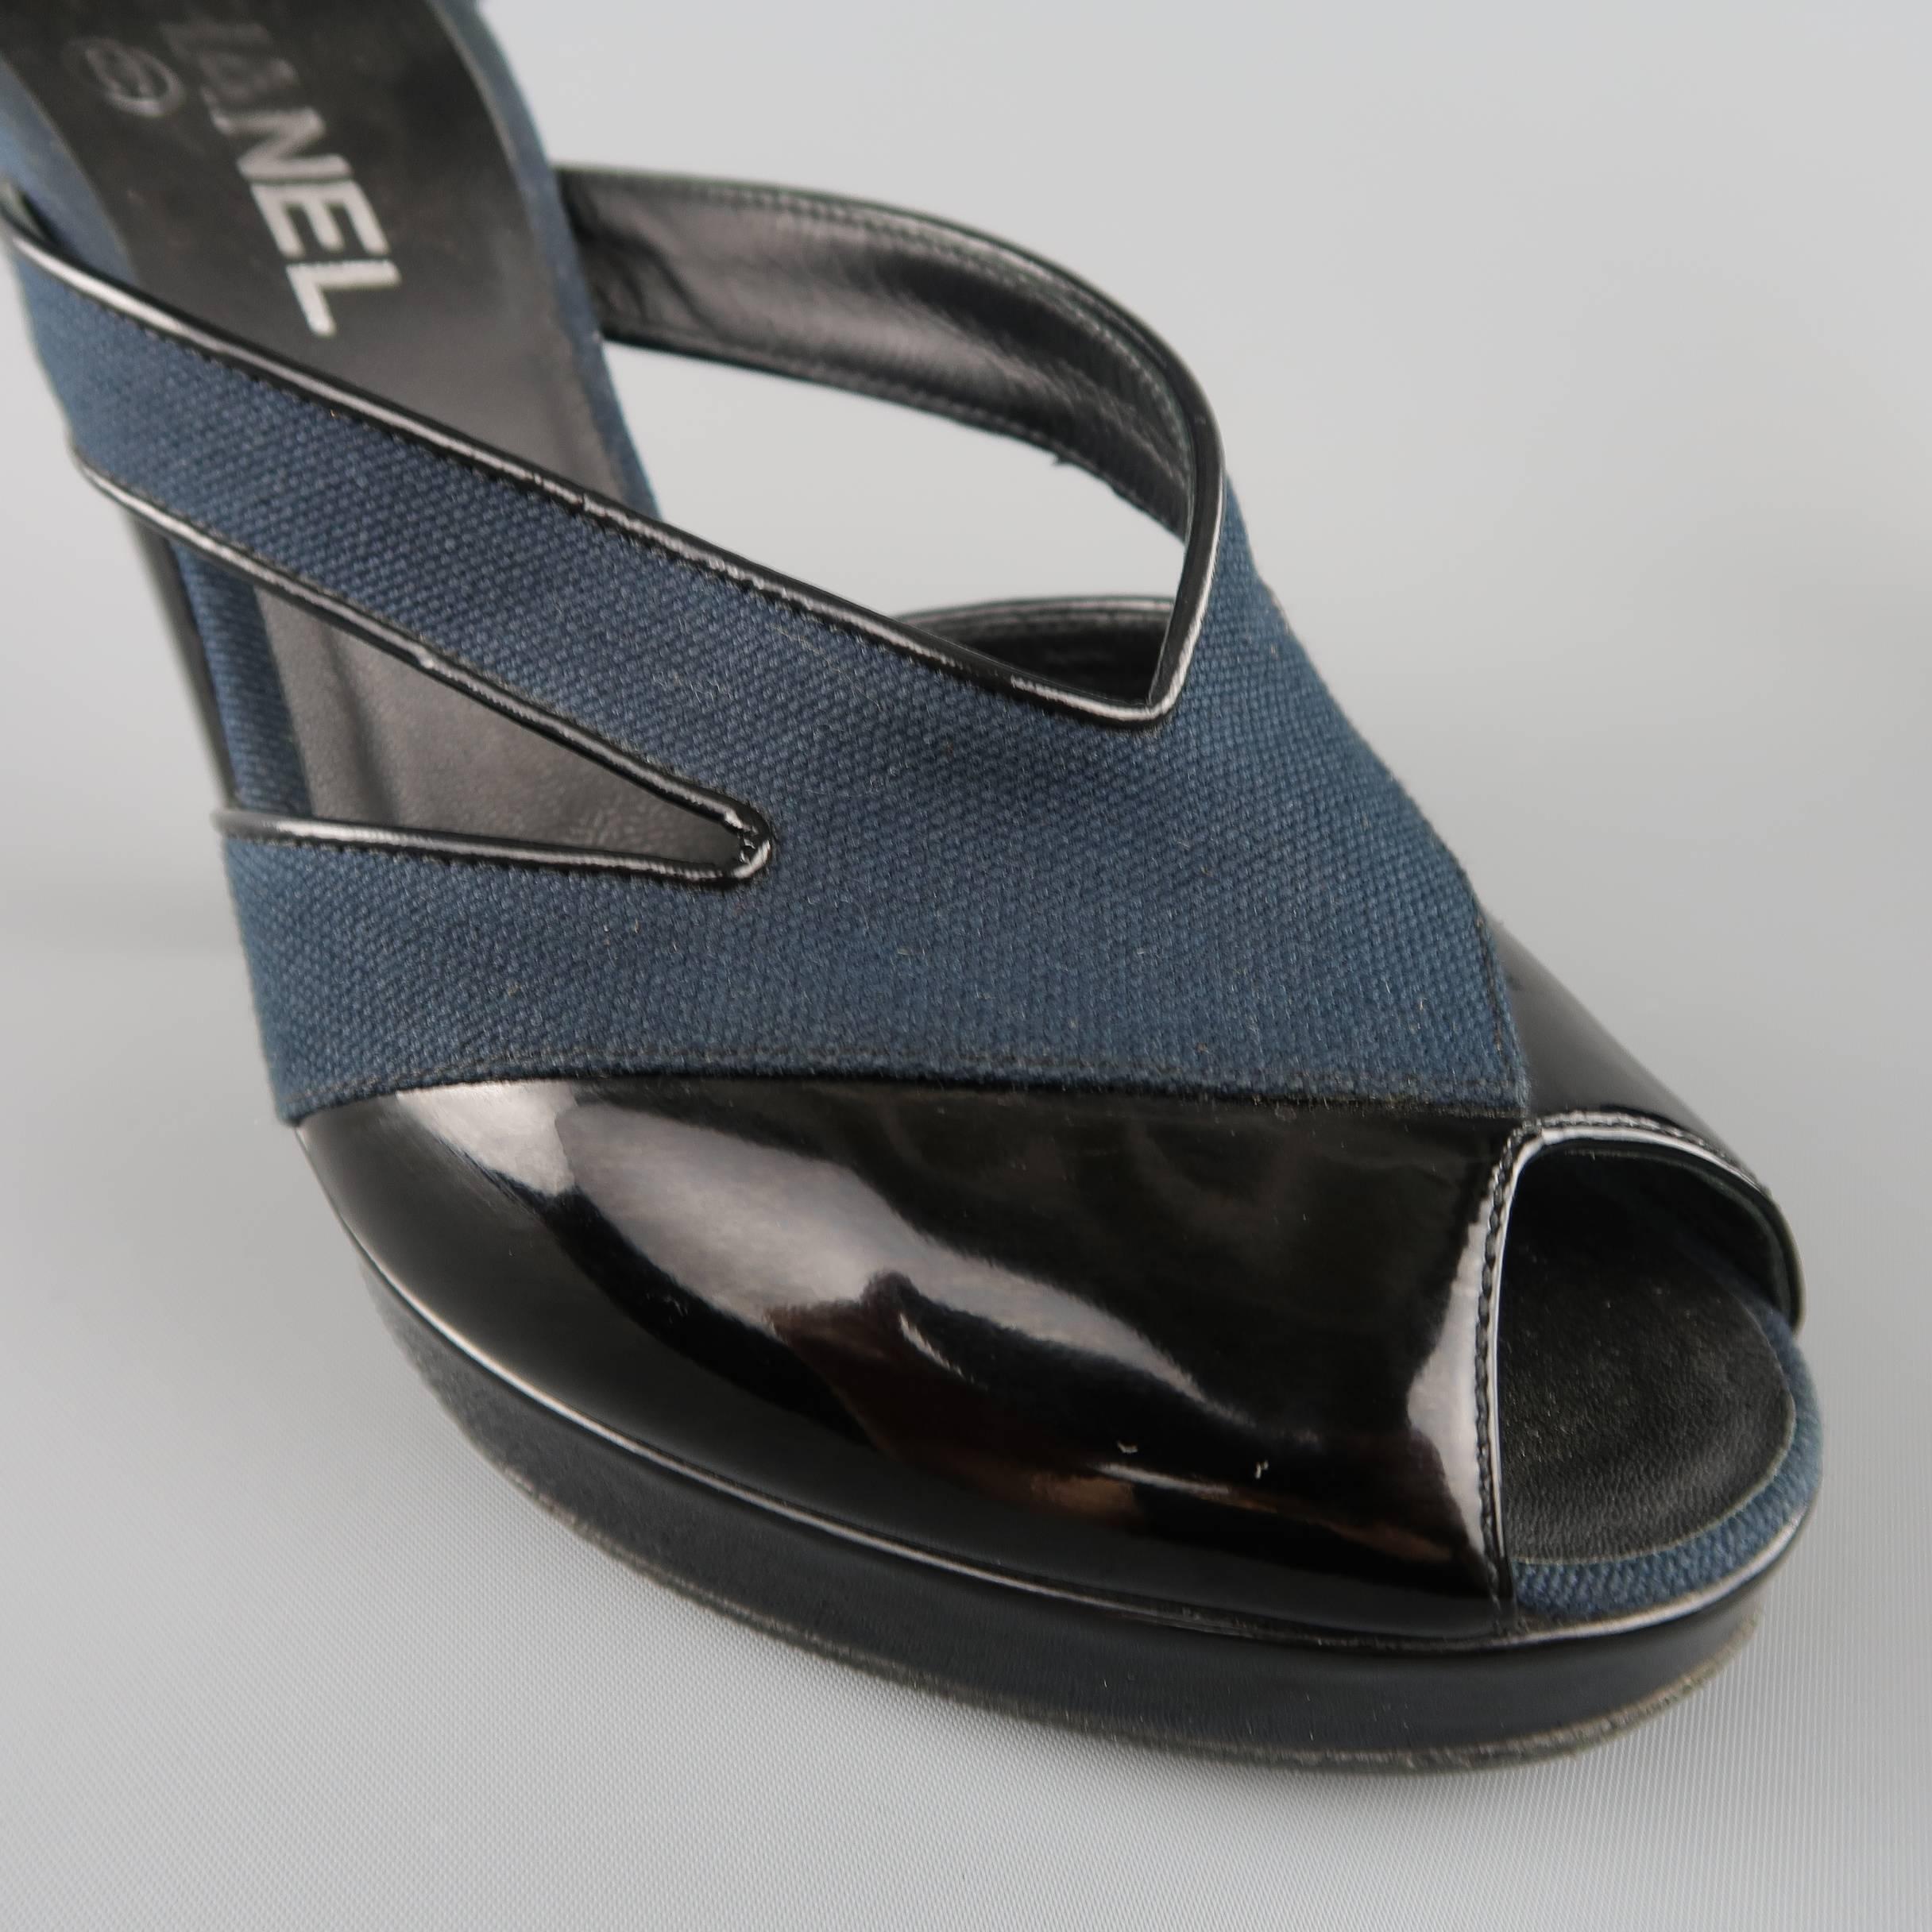 CHANEL pump sandals come in navy teal canvas and feature cutouts with patent leather piping, Mary Jane ankle strap, peep toe with patent leather covered platform, silver tone CC logo, and chunky, structural heel. Made in Italy.
 
Good Pre-Owned